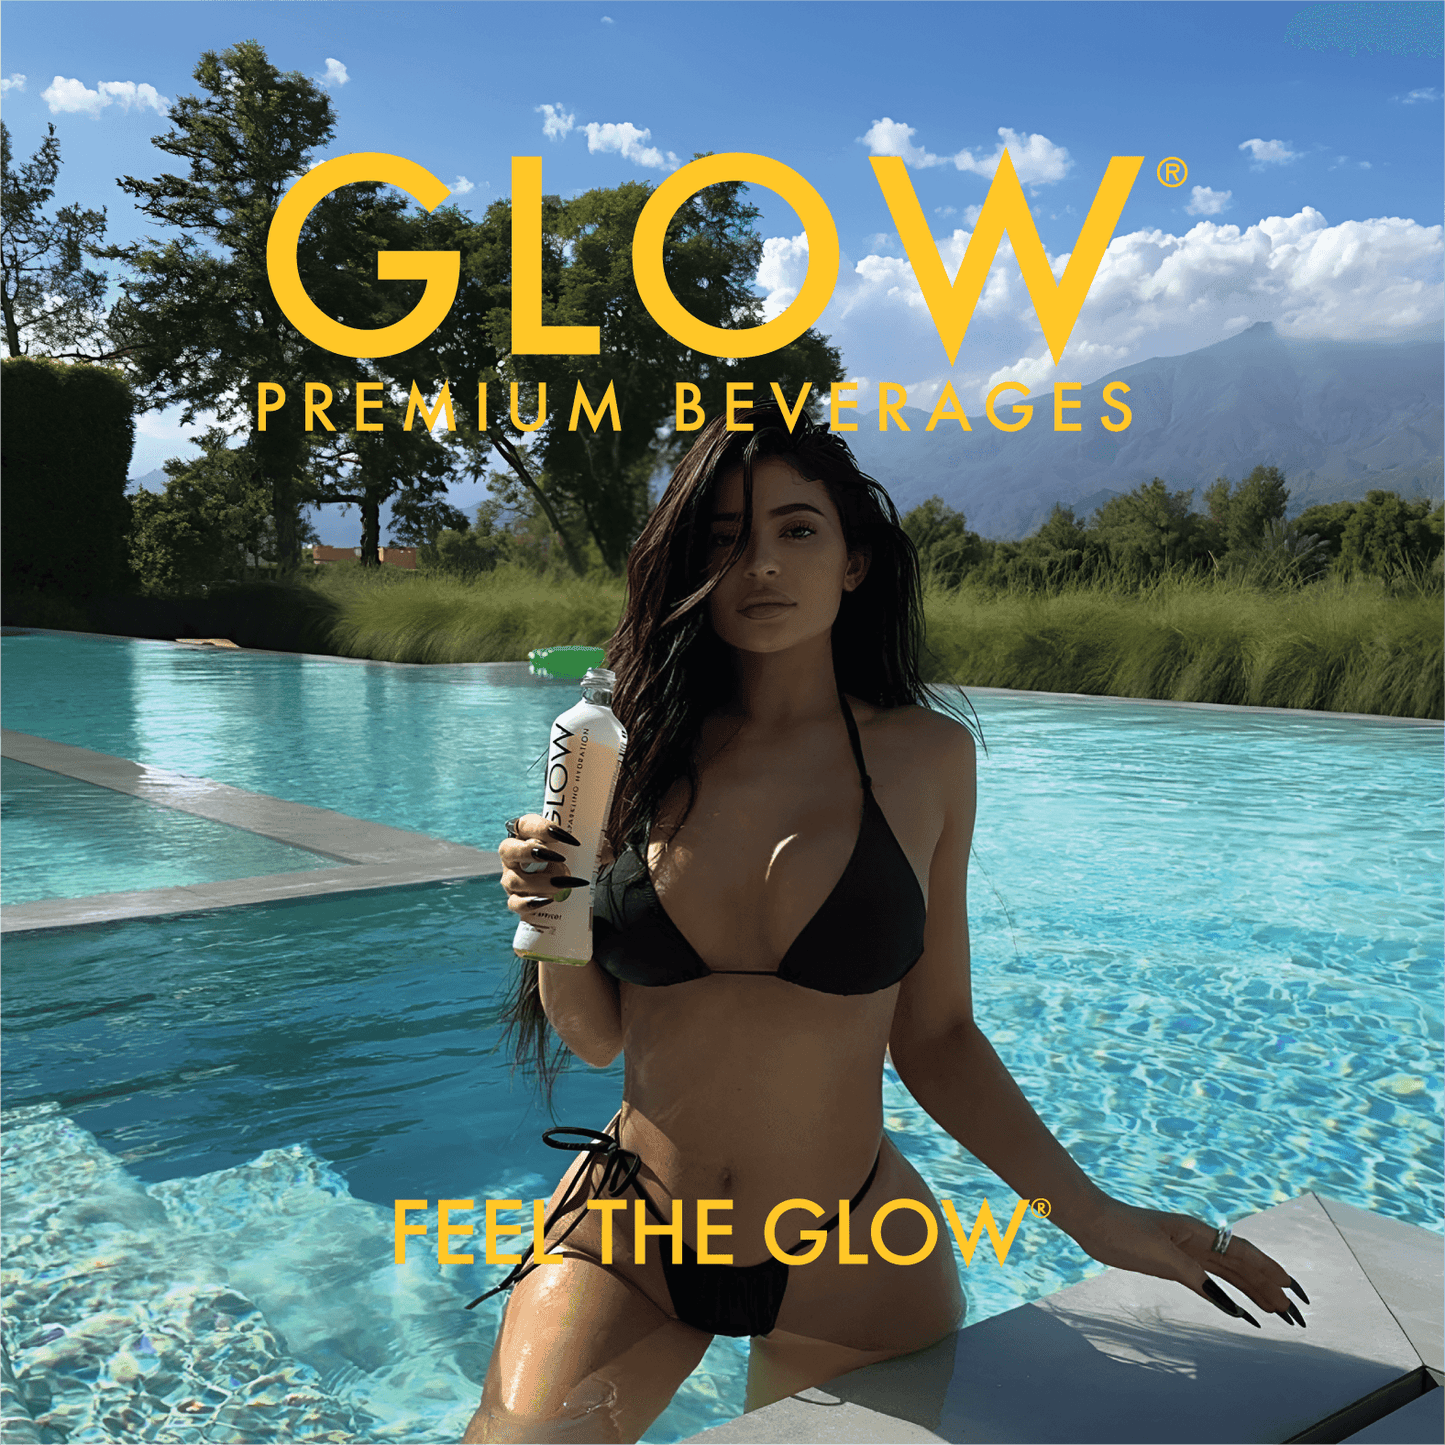 GLOW Sparkling Hydration Kylie Jenner Exclusive - Spicy Watermelon - Extreme Snacks